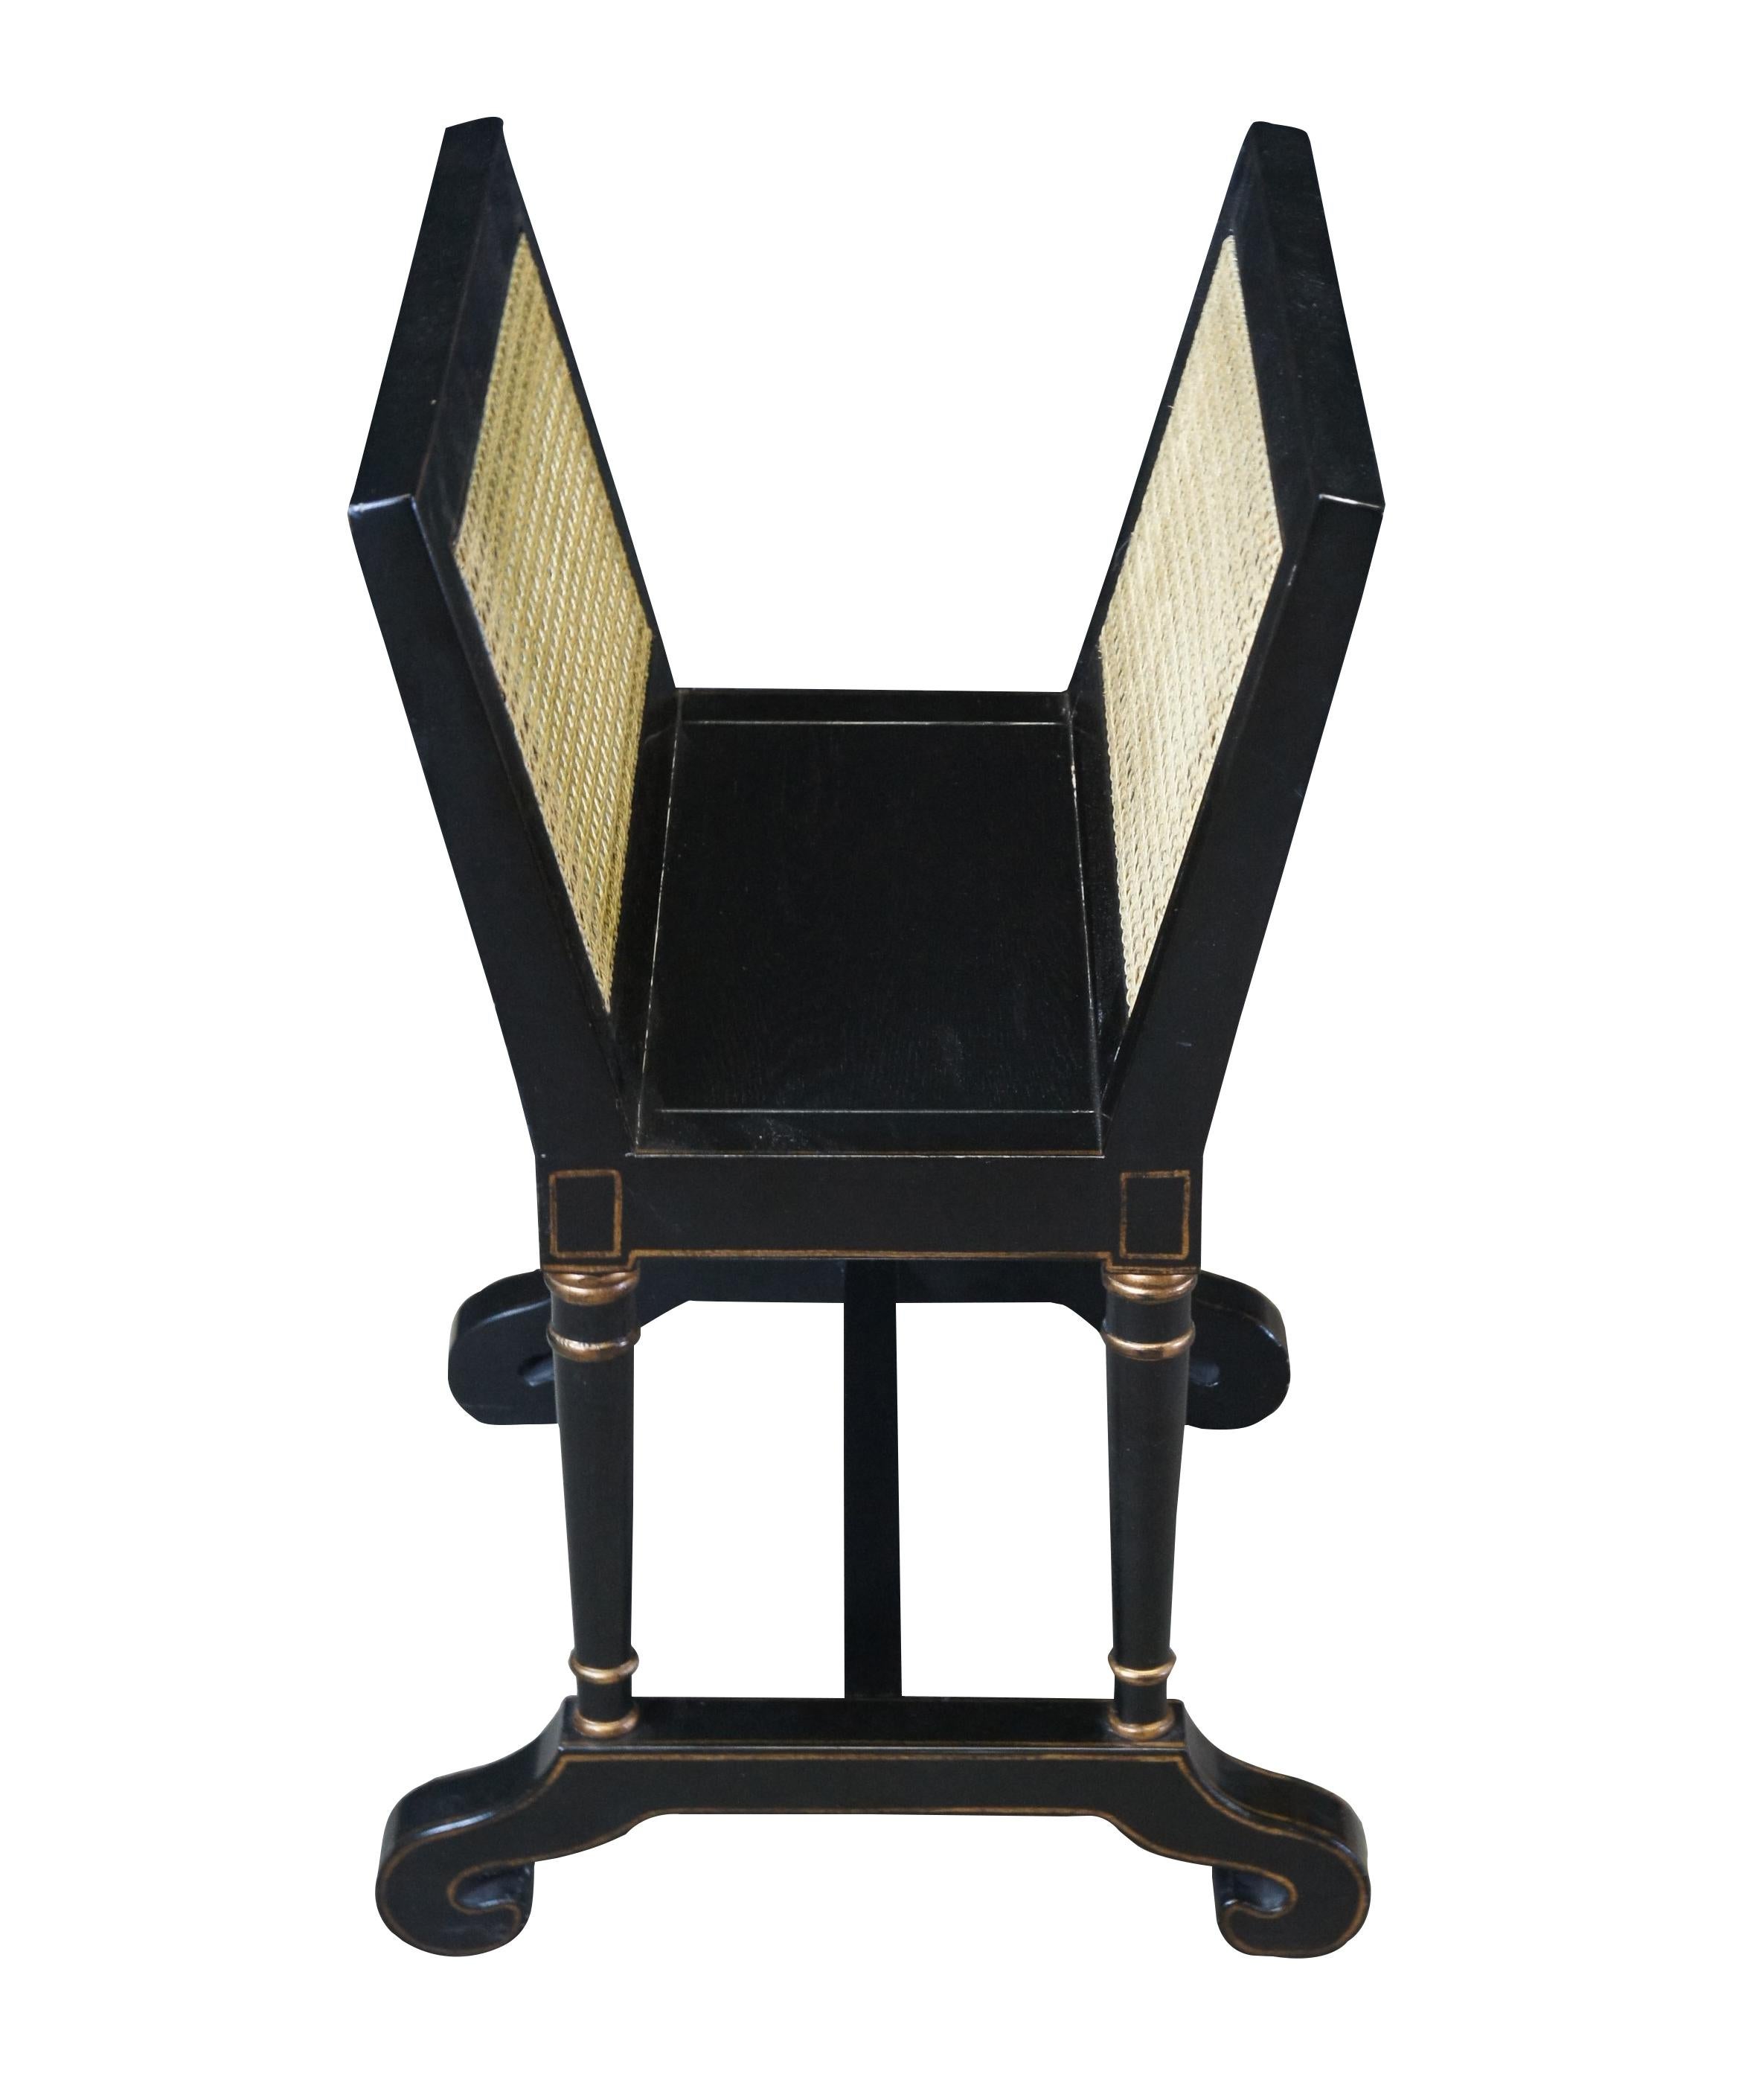 French Empire Napoleon III style ebonized magazine rack. Made from oak with flared caned magazine or newspaper supports.  The top is supported by turned columns over scrolled feet connected by an H stretcher.  Features gold trim